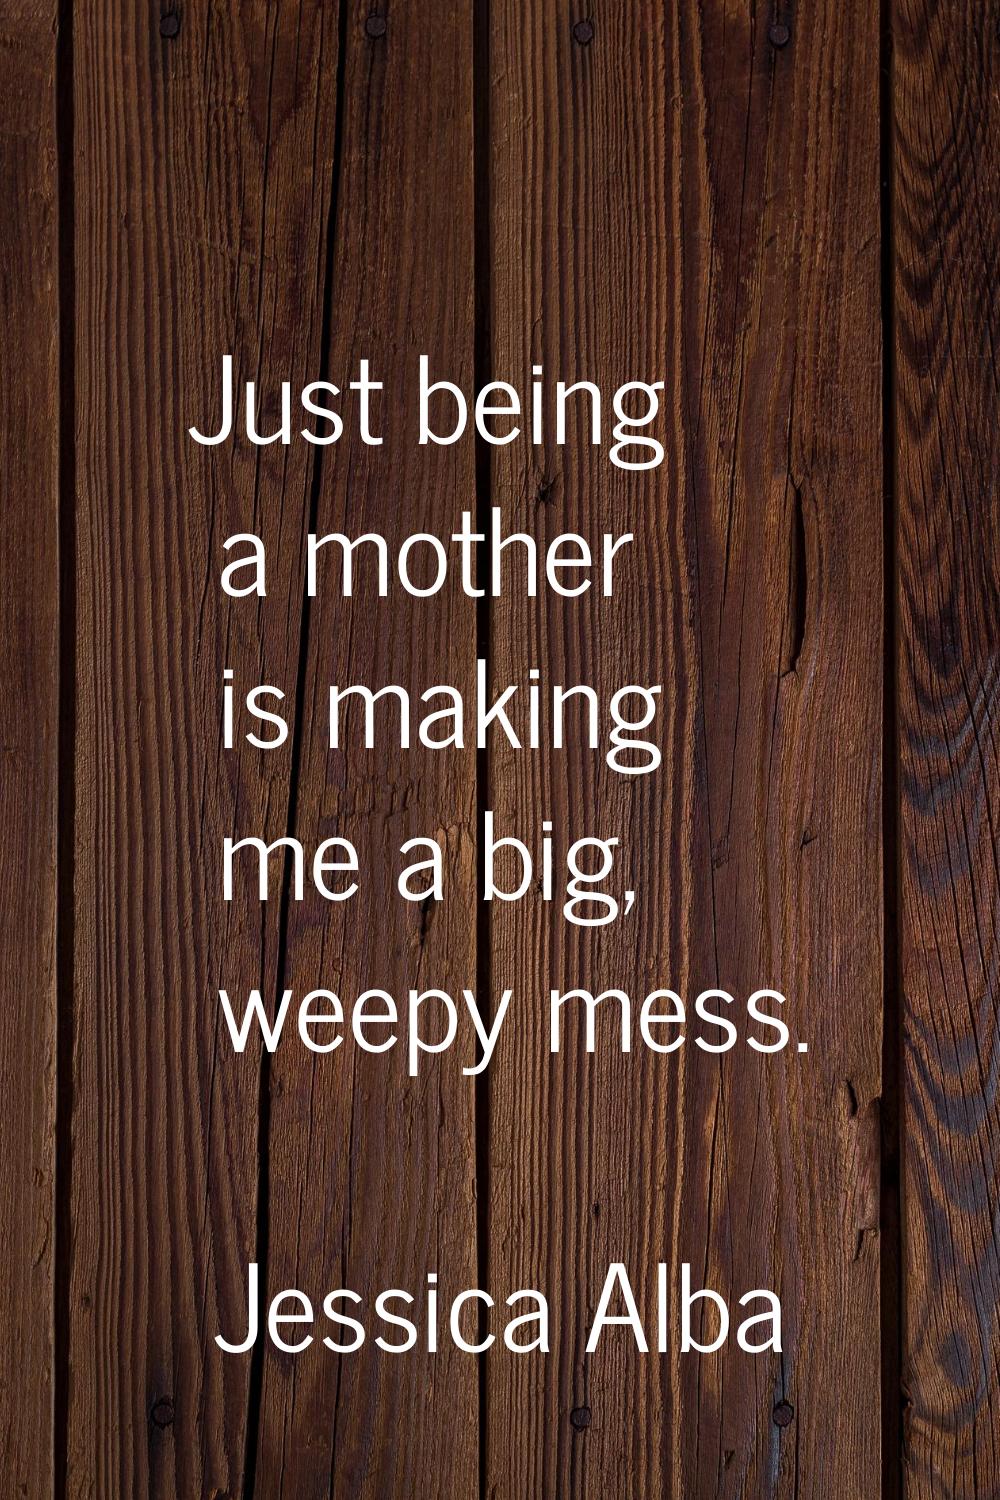 Just being a mother is making me a big, weepy mess.